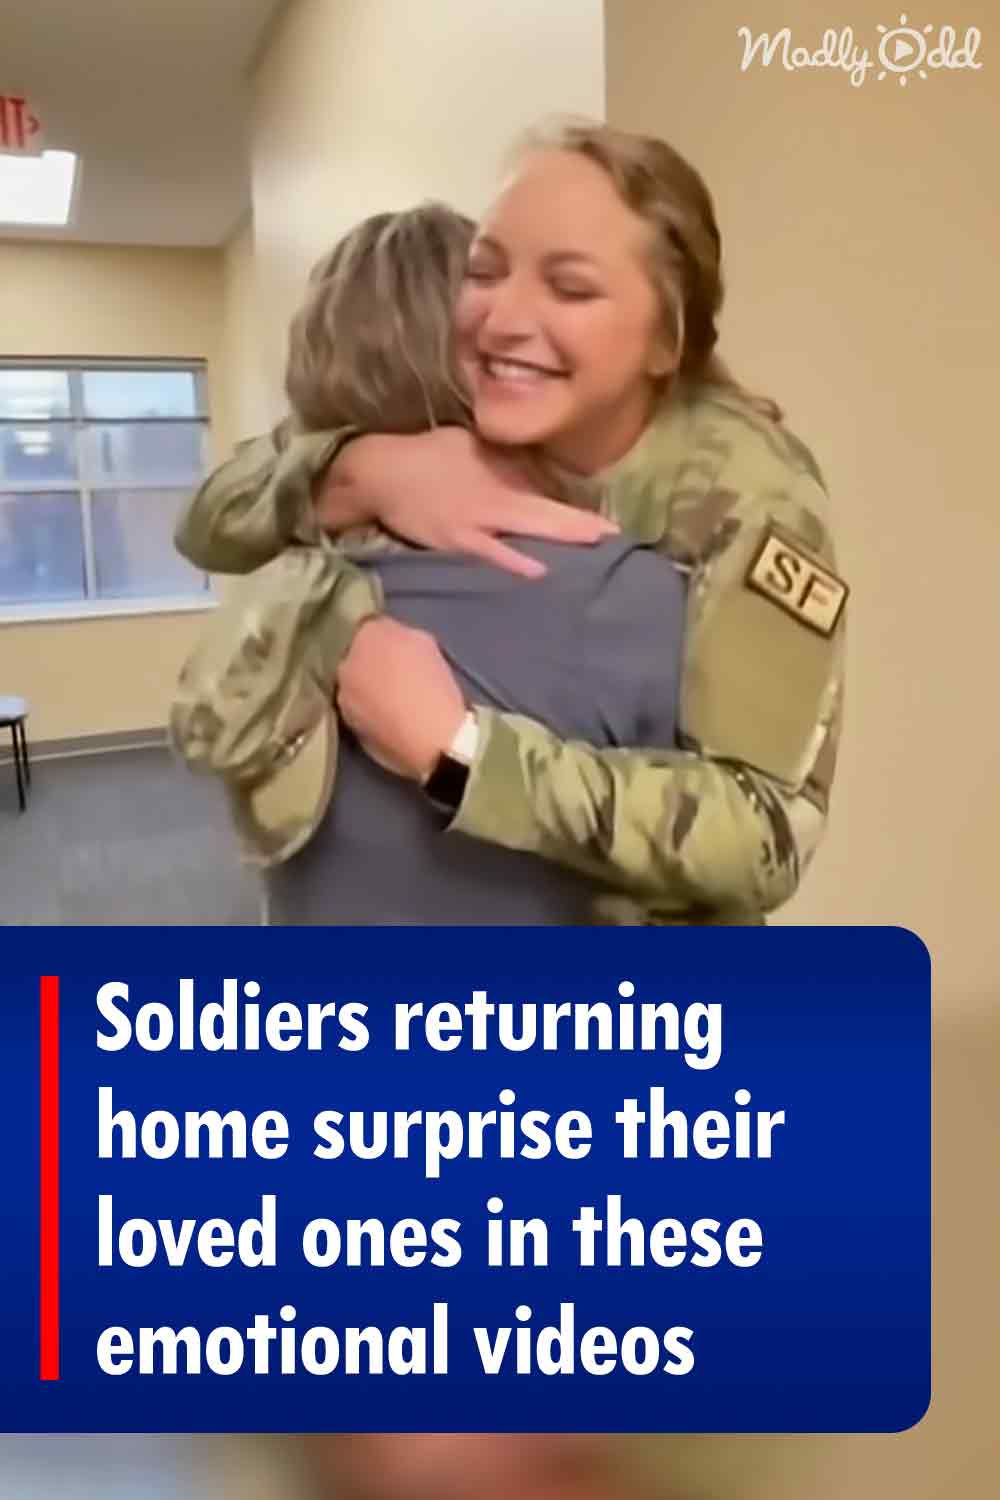 Soldiers returning home surprise their loved ones in these emotional videos